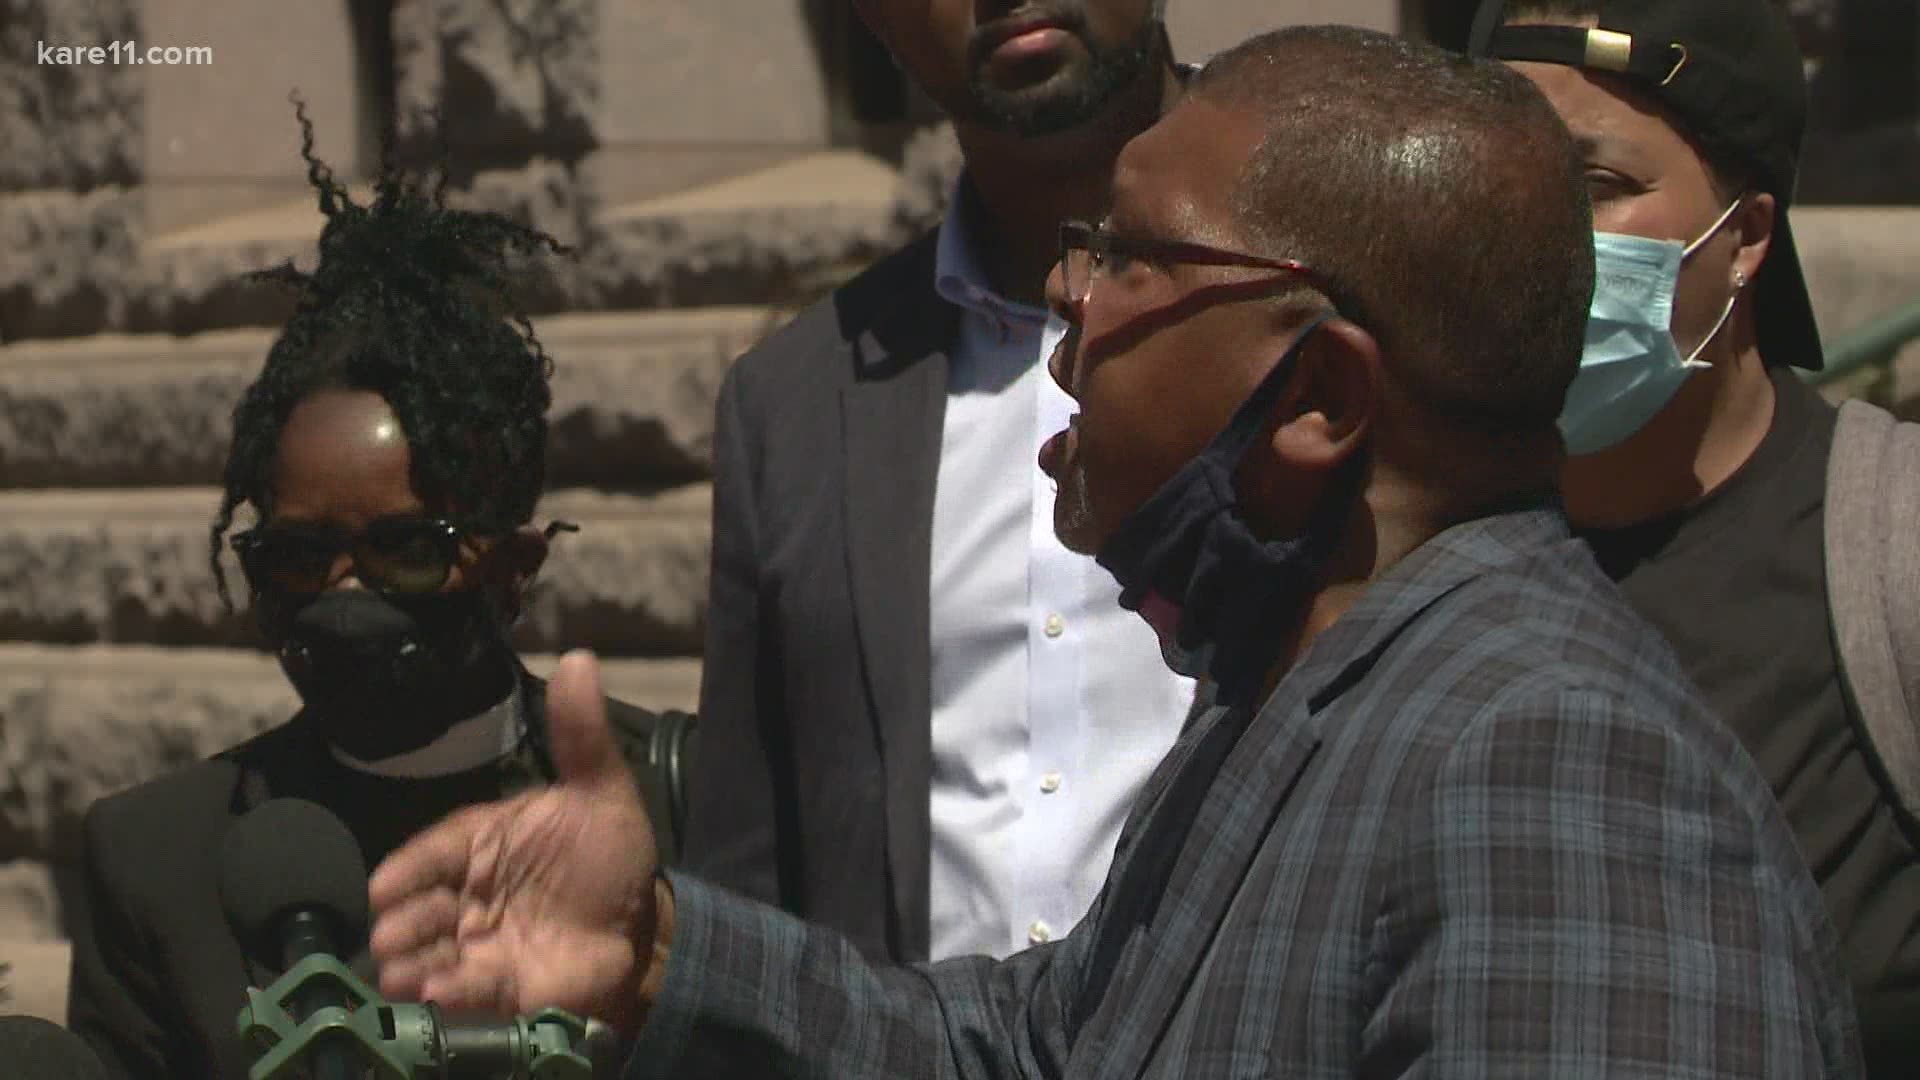 Leaders also showed their support for Minneapolis Police Chief Medaria Arradondo in a Thursday news conference.